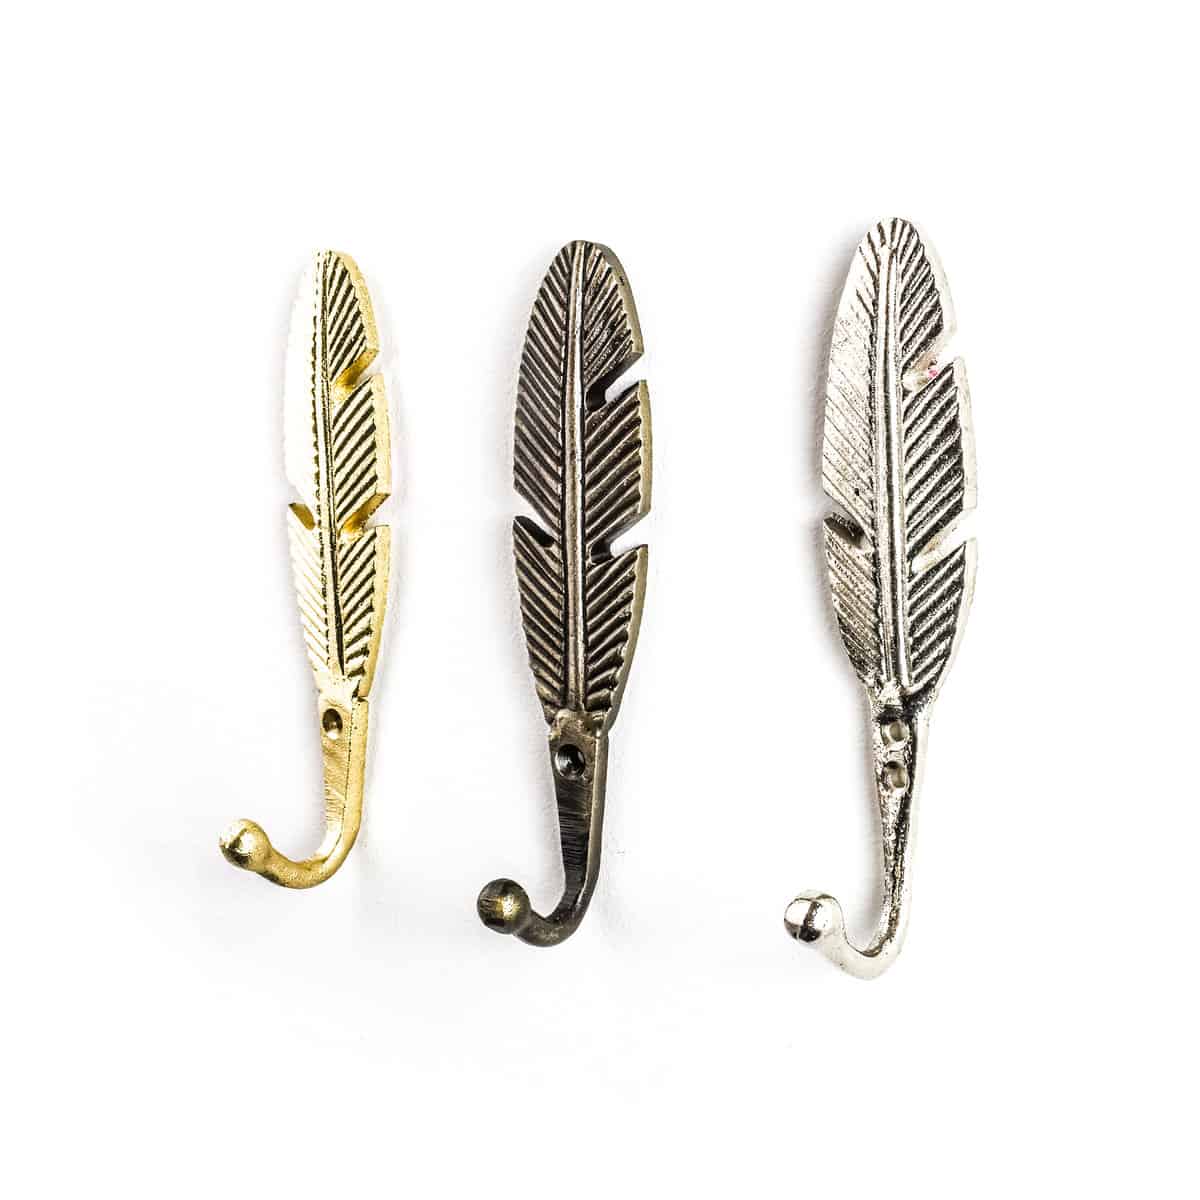 Gold Feather Wall Hook - Shop for cabinet knobs and wall hooks online